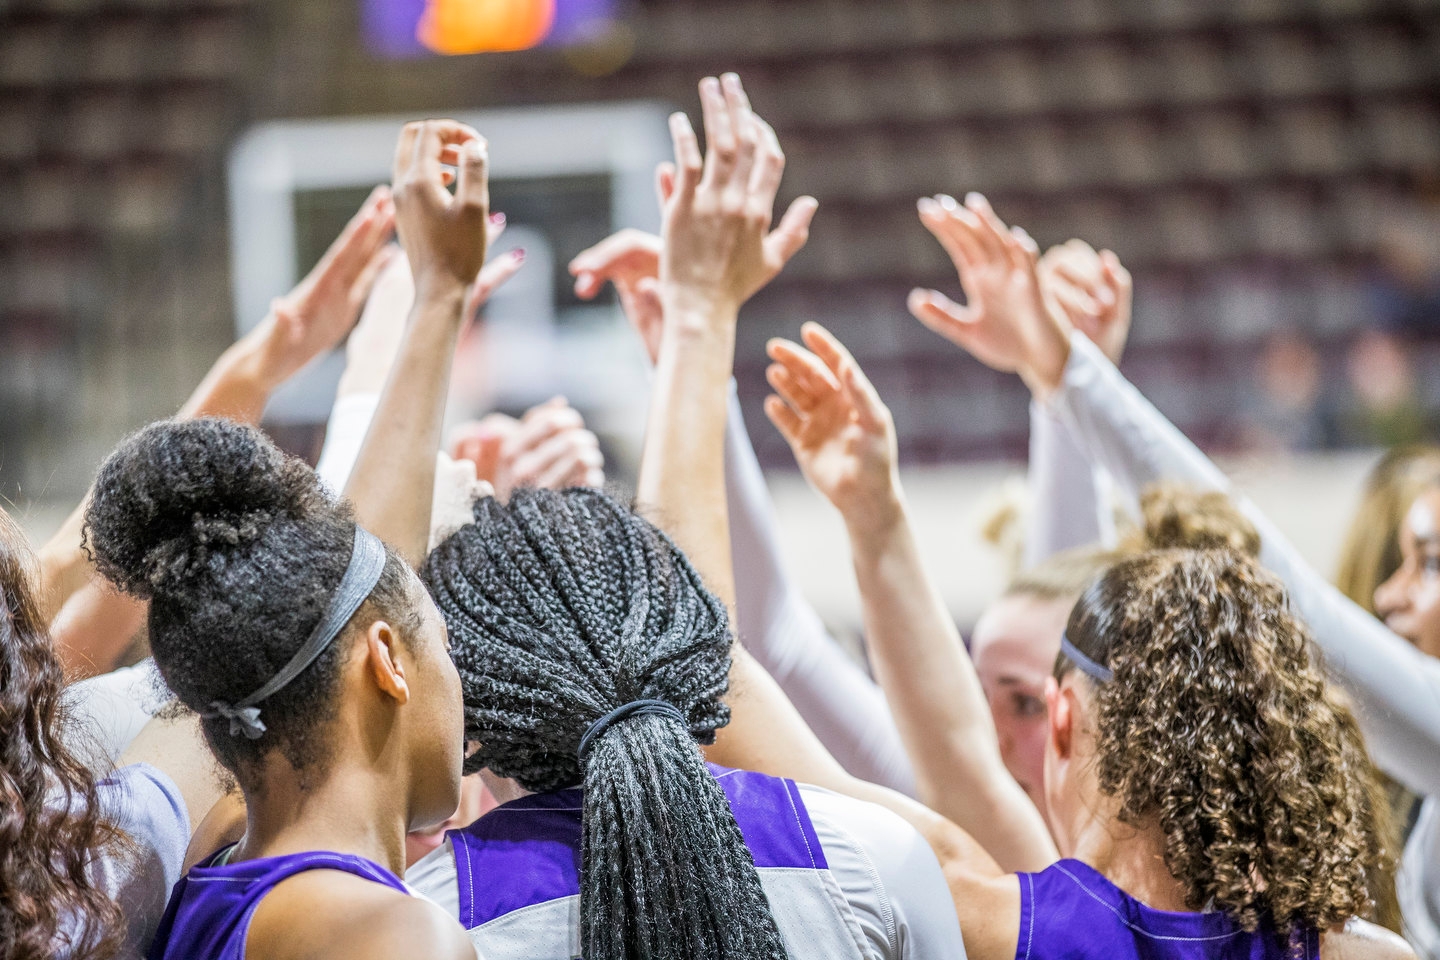 The Wildcats showed great team chemistry and grit in rallying to the Southland Conference Tournament title and their first-ever bid to March Madness.